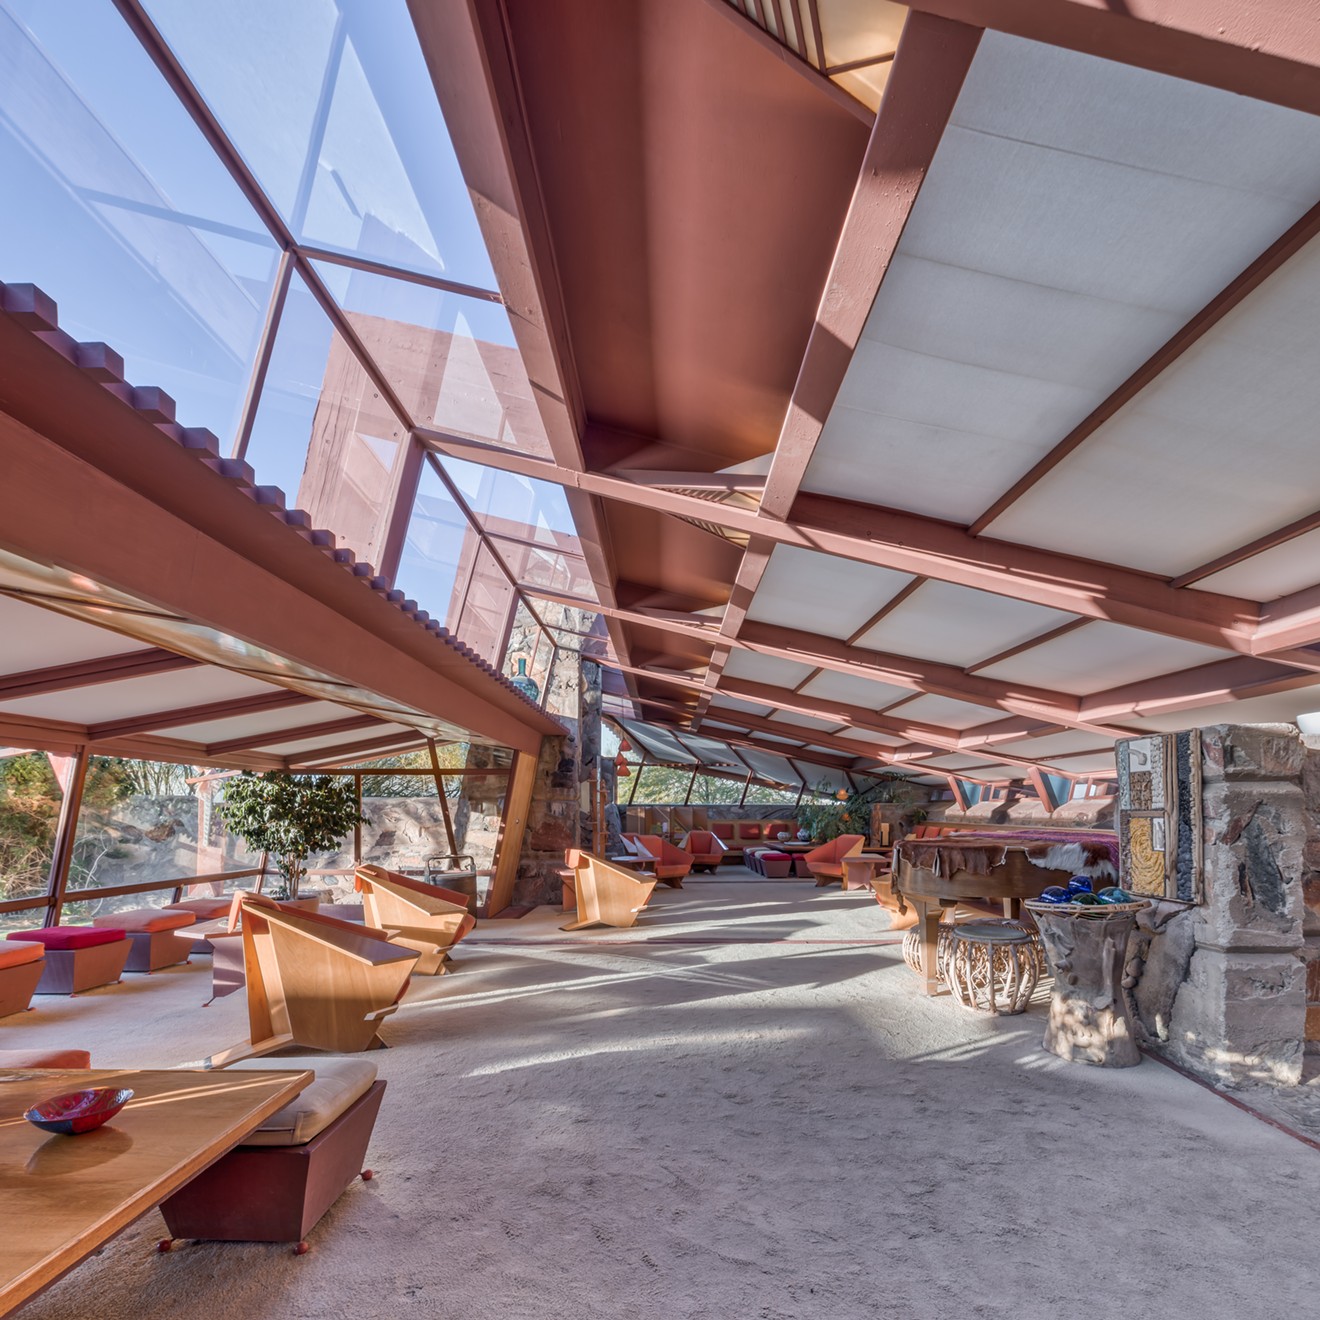 A view of Taliesin West is part of the "Sacred Spaces" exhibit by Phoenix photographer Andrew Pielage, who is chronicling the works of Frank Lloyd Wright.